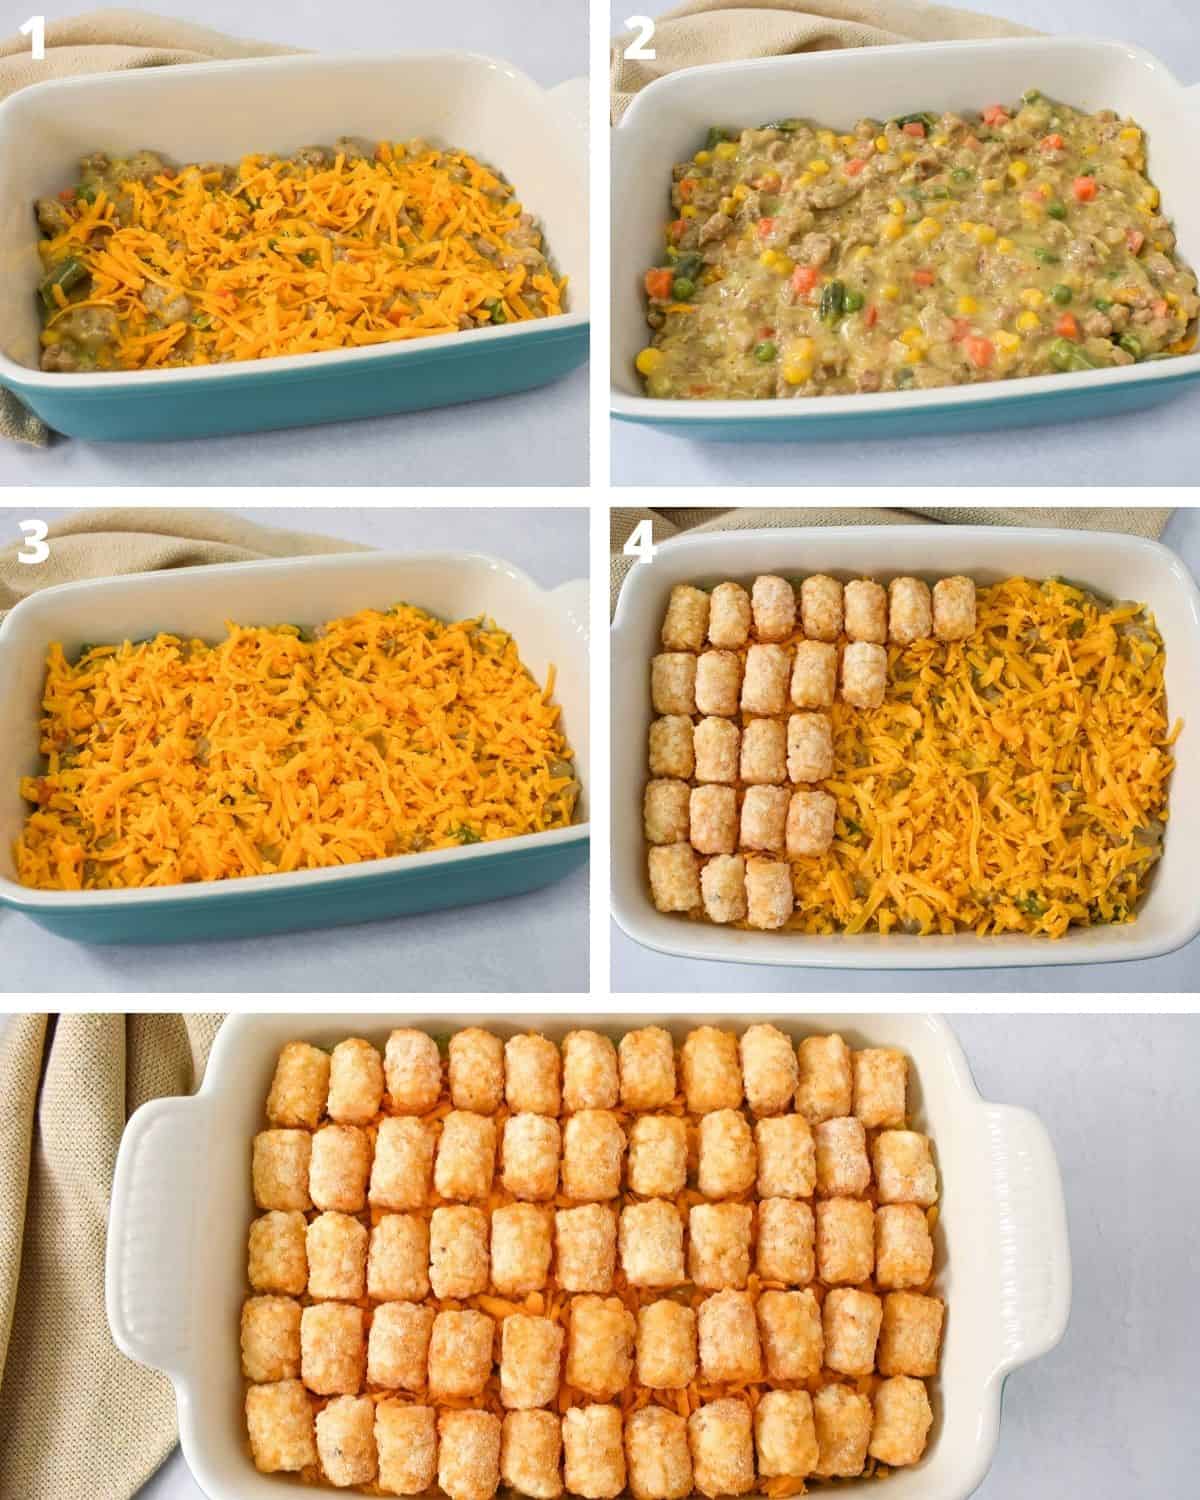 A collage of five images showing the steps to building the casserole. With the last image on the bottom being the completed dish ready for baking.